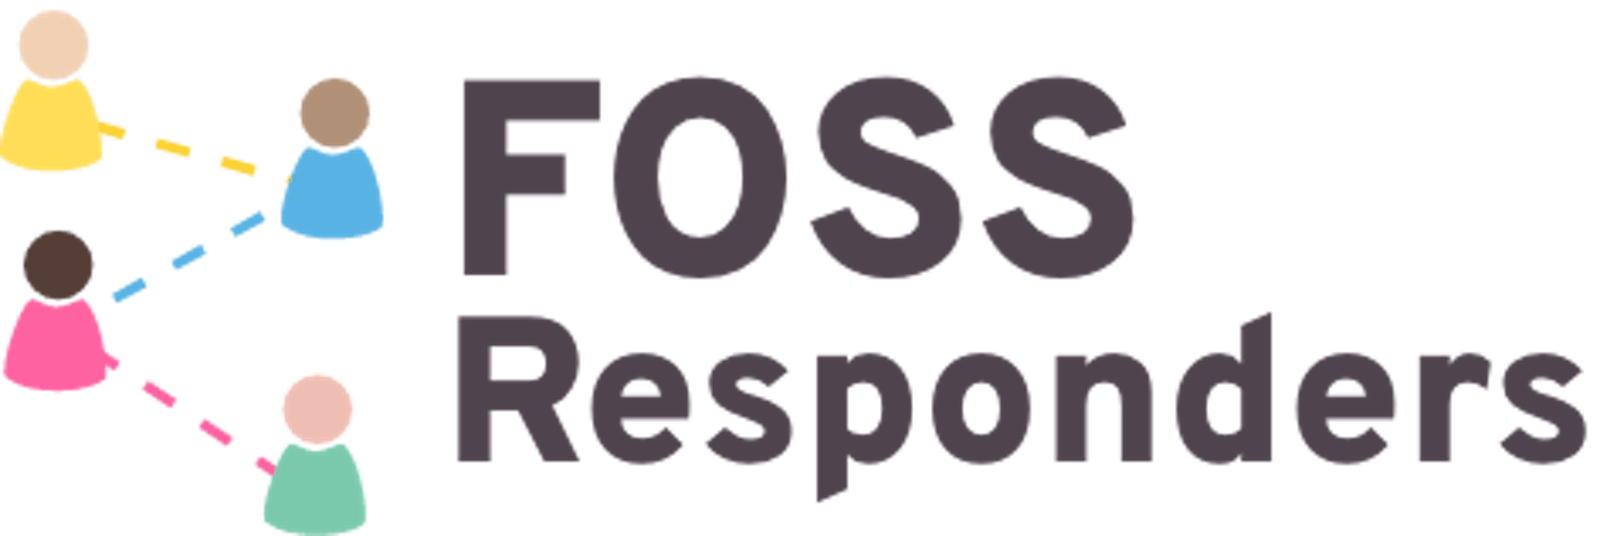 FOSS Responders - Sustaining the Future of FOSS Together